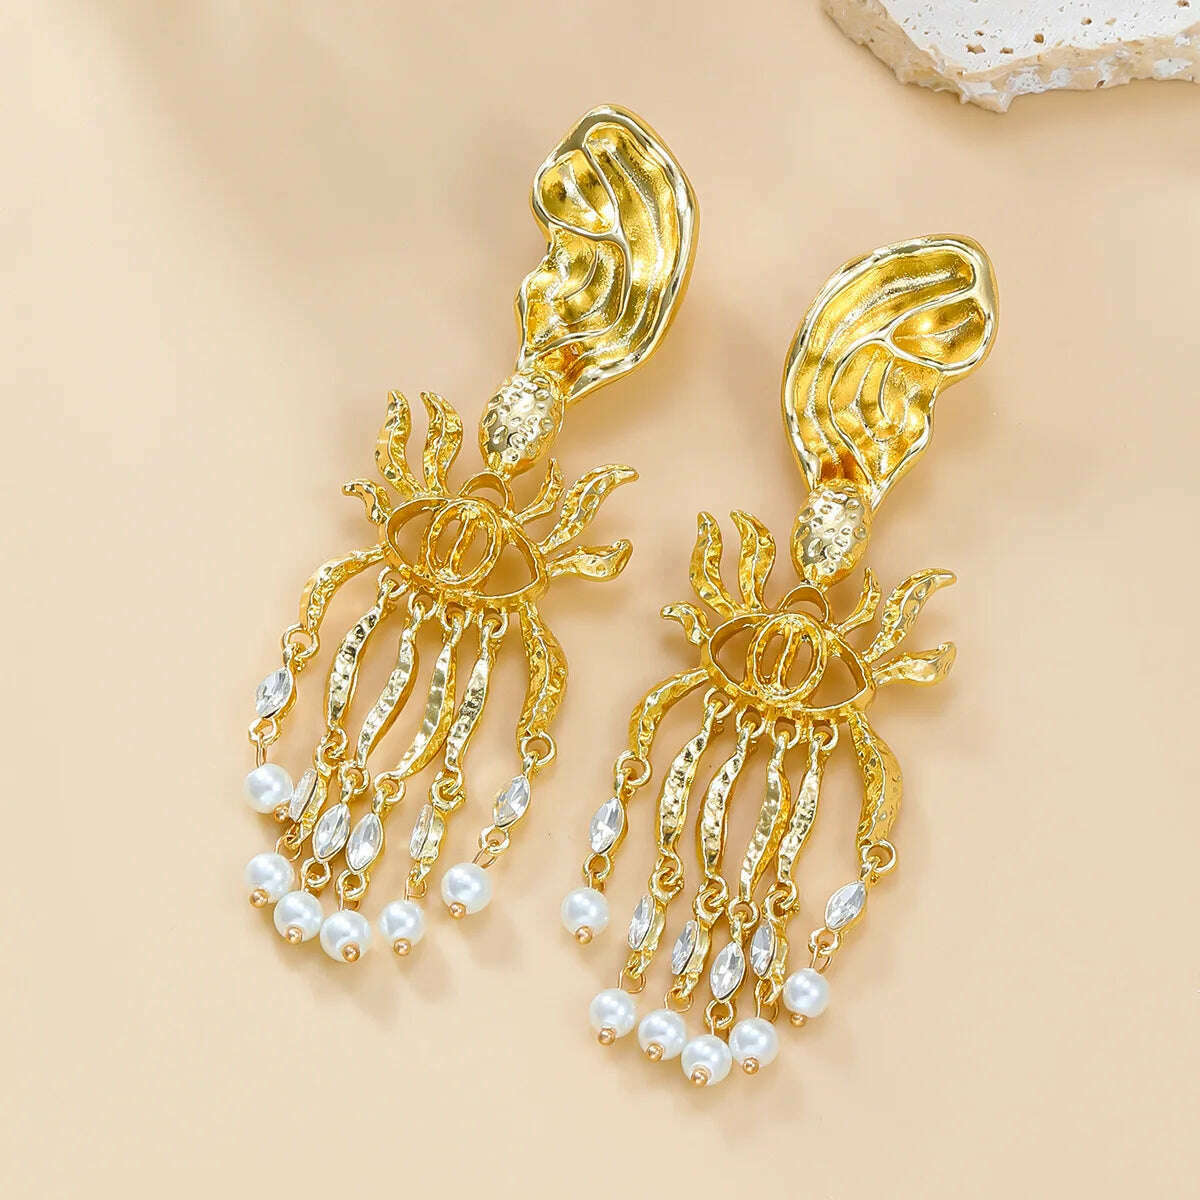 KIMLUD, Vintage Baroque Style Metal Eye Dangle Earrings For Women Jewelry Exaggerated Fashion Show Statement Earrings  Accessories, golden yellow, KIMLUD Womens Clothes